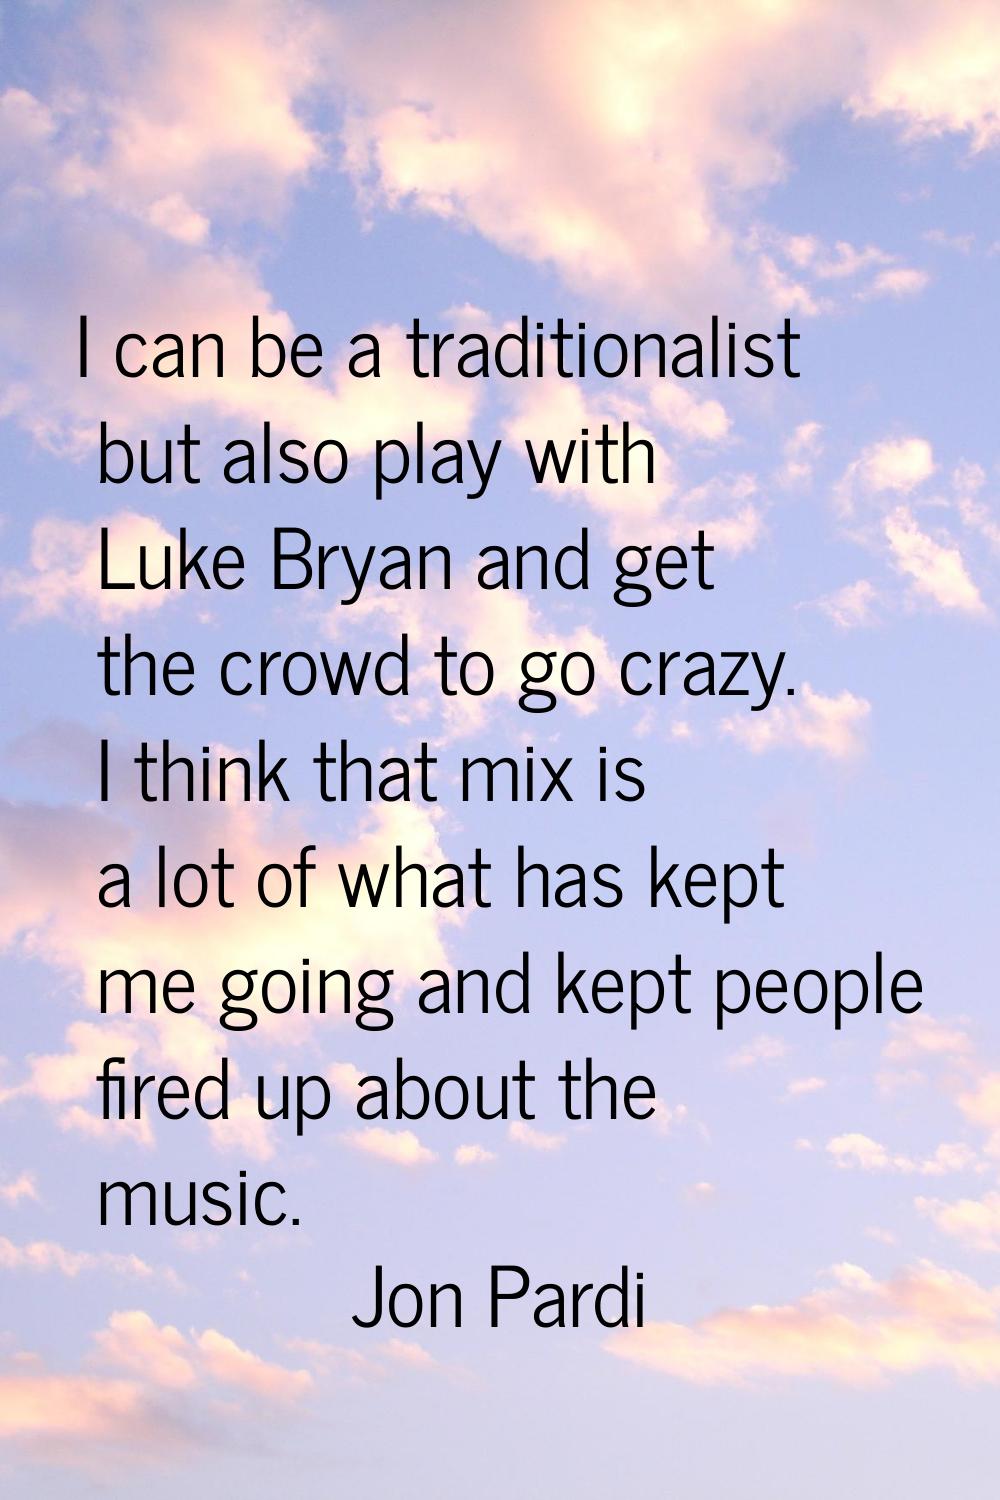 I can be a traditionalist but also play with Luke Bryan and get the crowd to go crazy. I think that